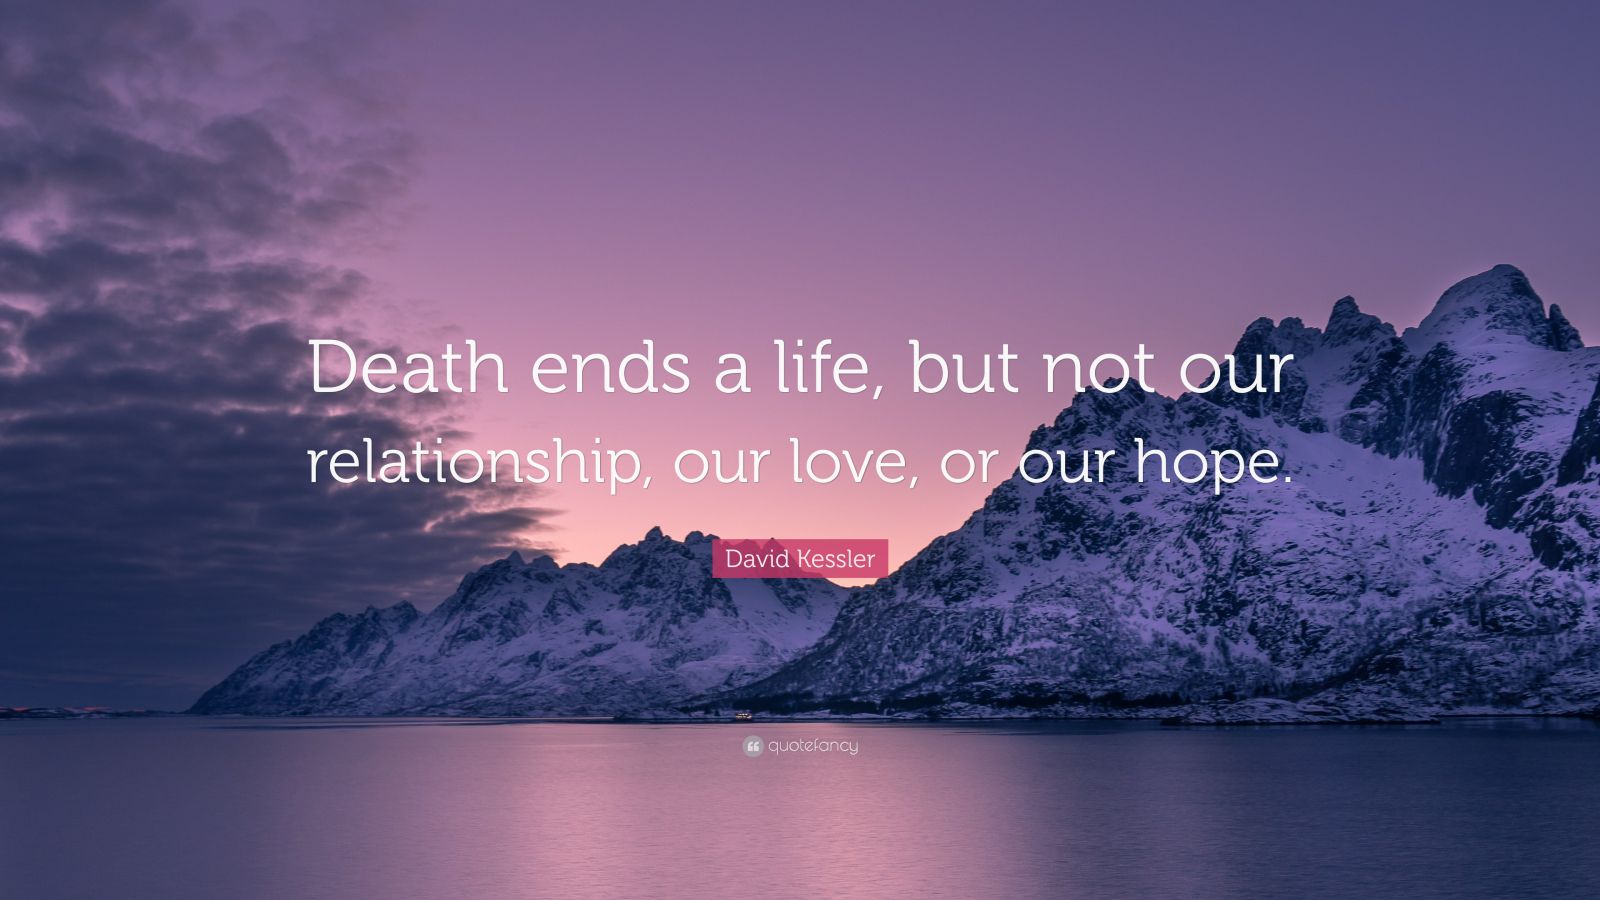 David Kessler Quote: “Death ends a life, but not our relationship, our ...